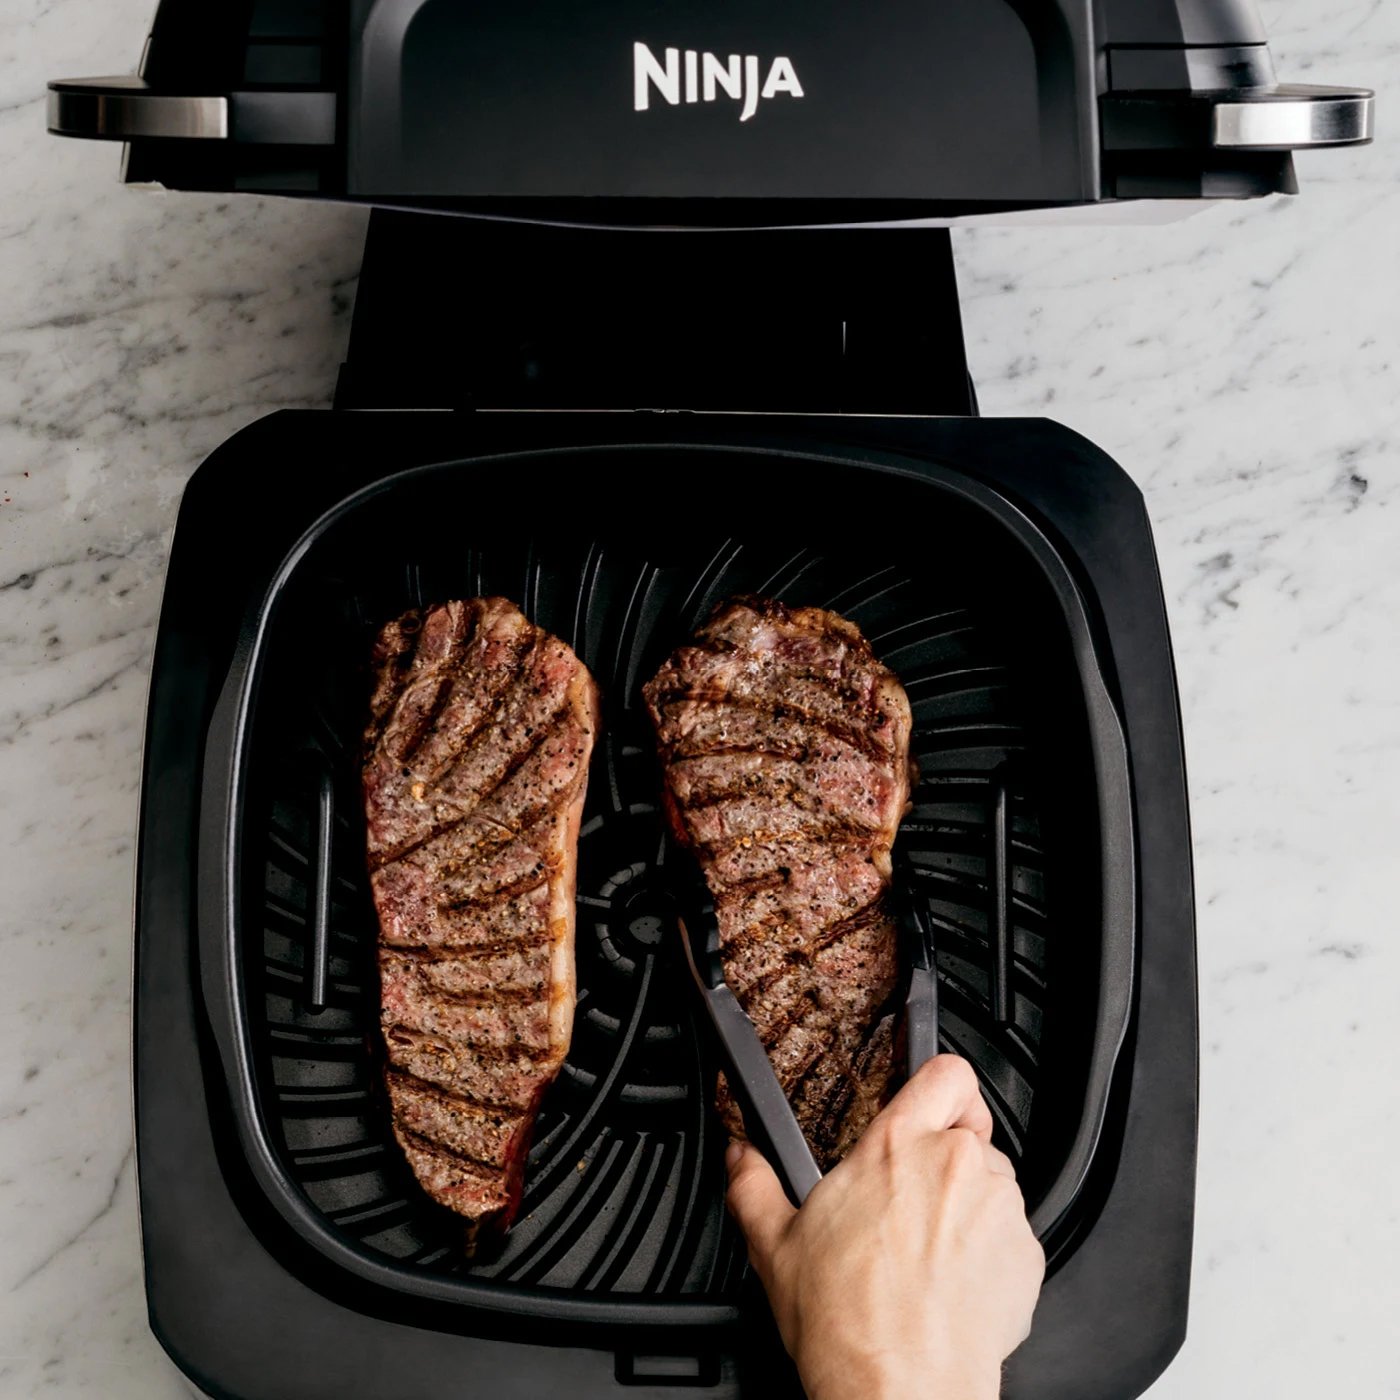 Is Your Ninja Foodi Grill Smoking? This May Be Why. - Grilling Montana